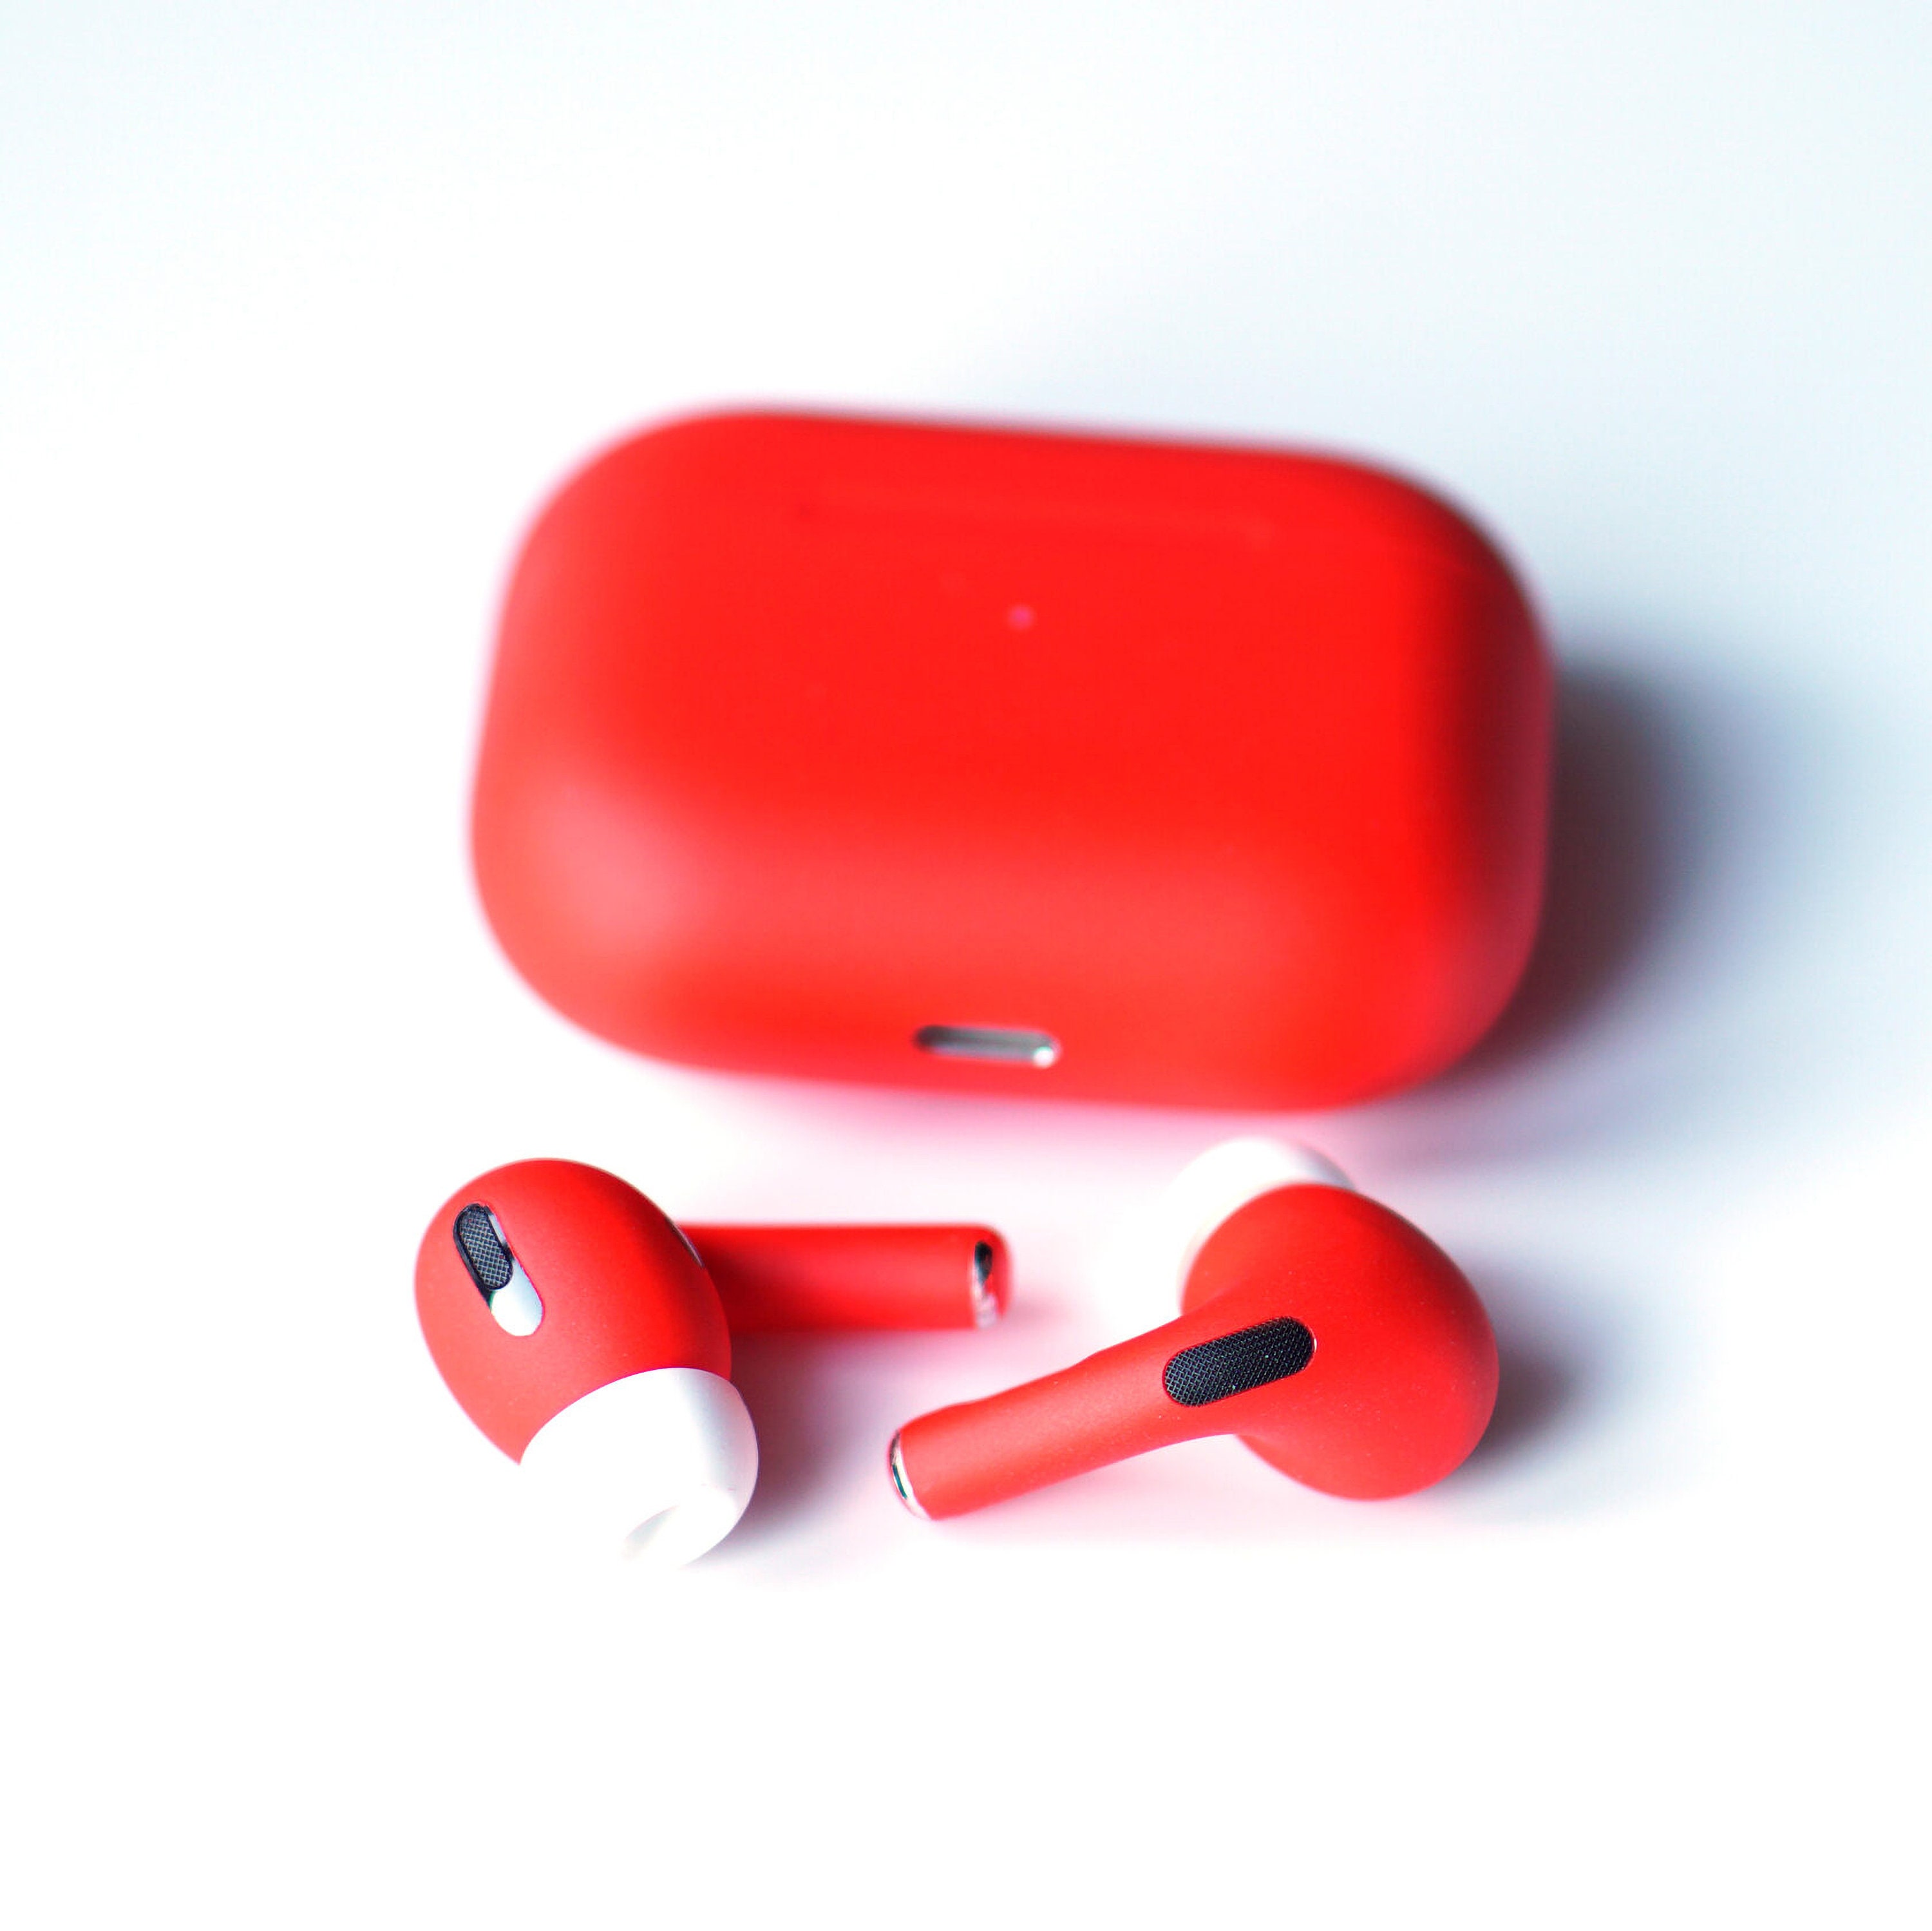 Airpods pro красный. AIRPODS Pro Red. AIRPODS Pro (Matte Red). AIRPODS 2 красные. Наушники AIRPODS Pro.